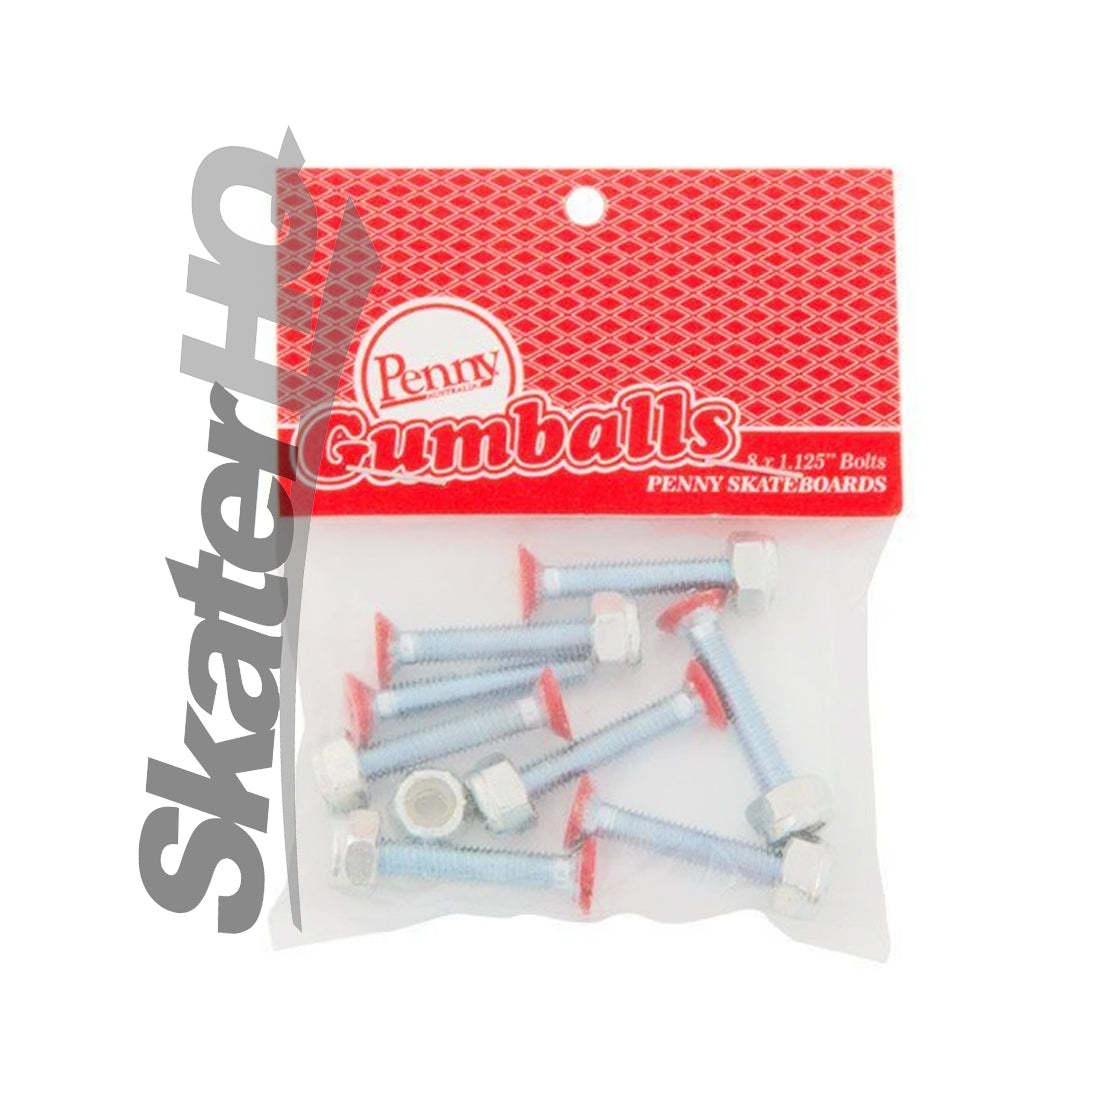 Penny Gumball 1.125 Bolts - Red Skateboard Hardware and Parts